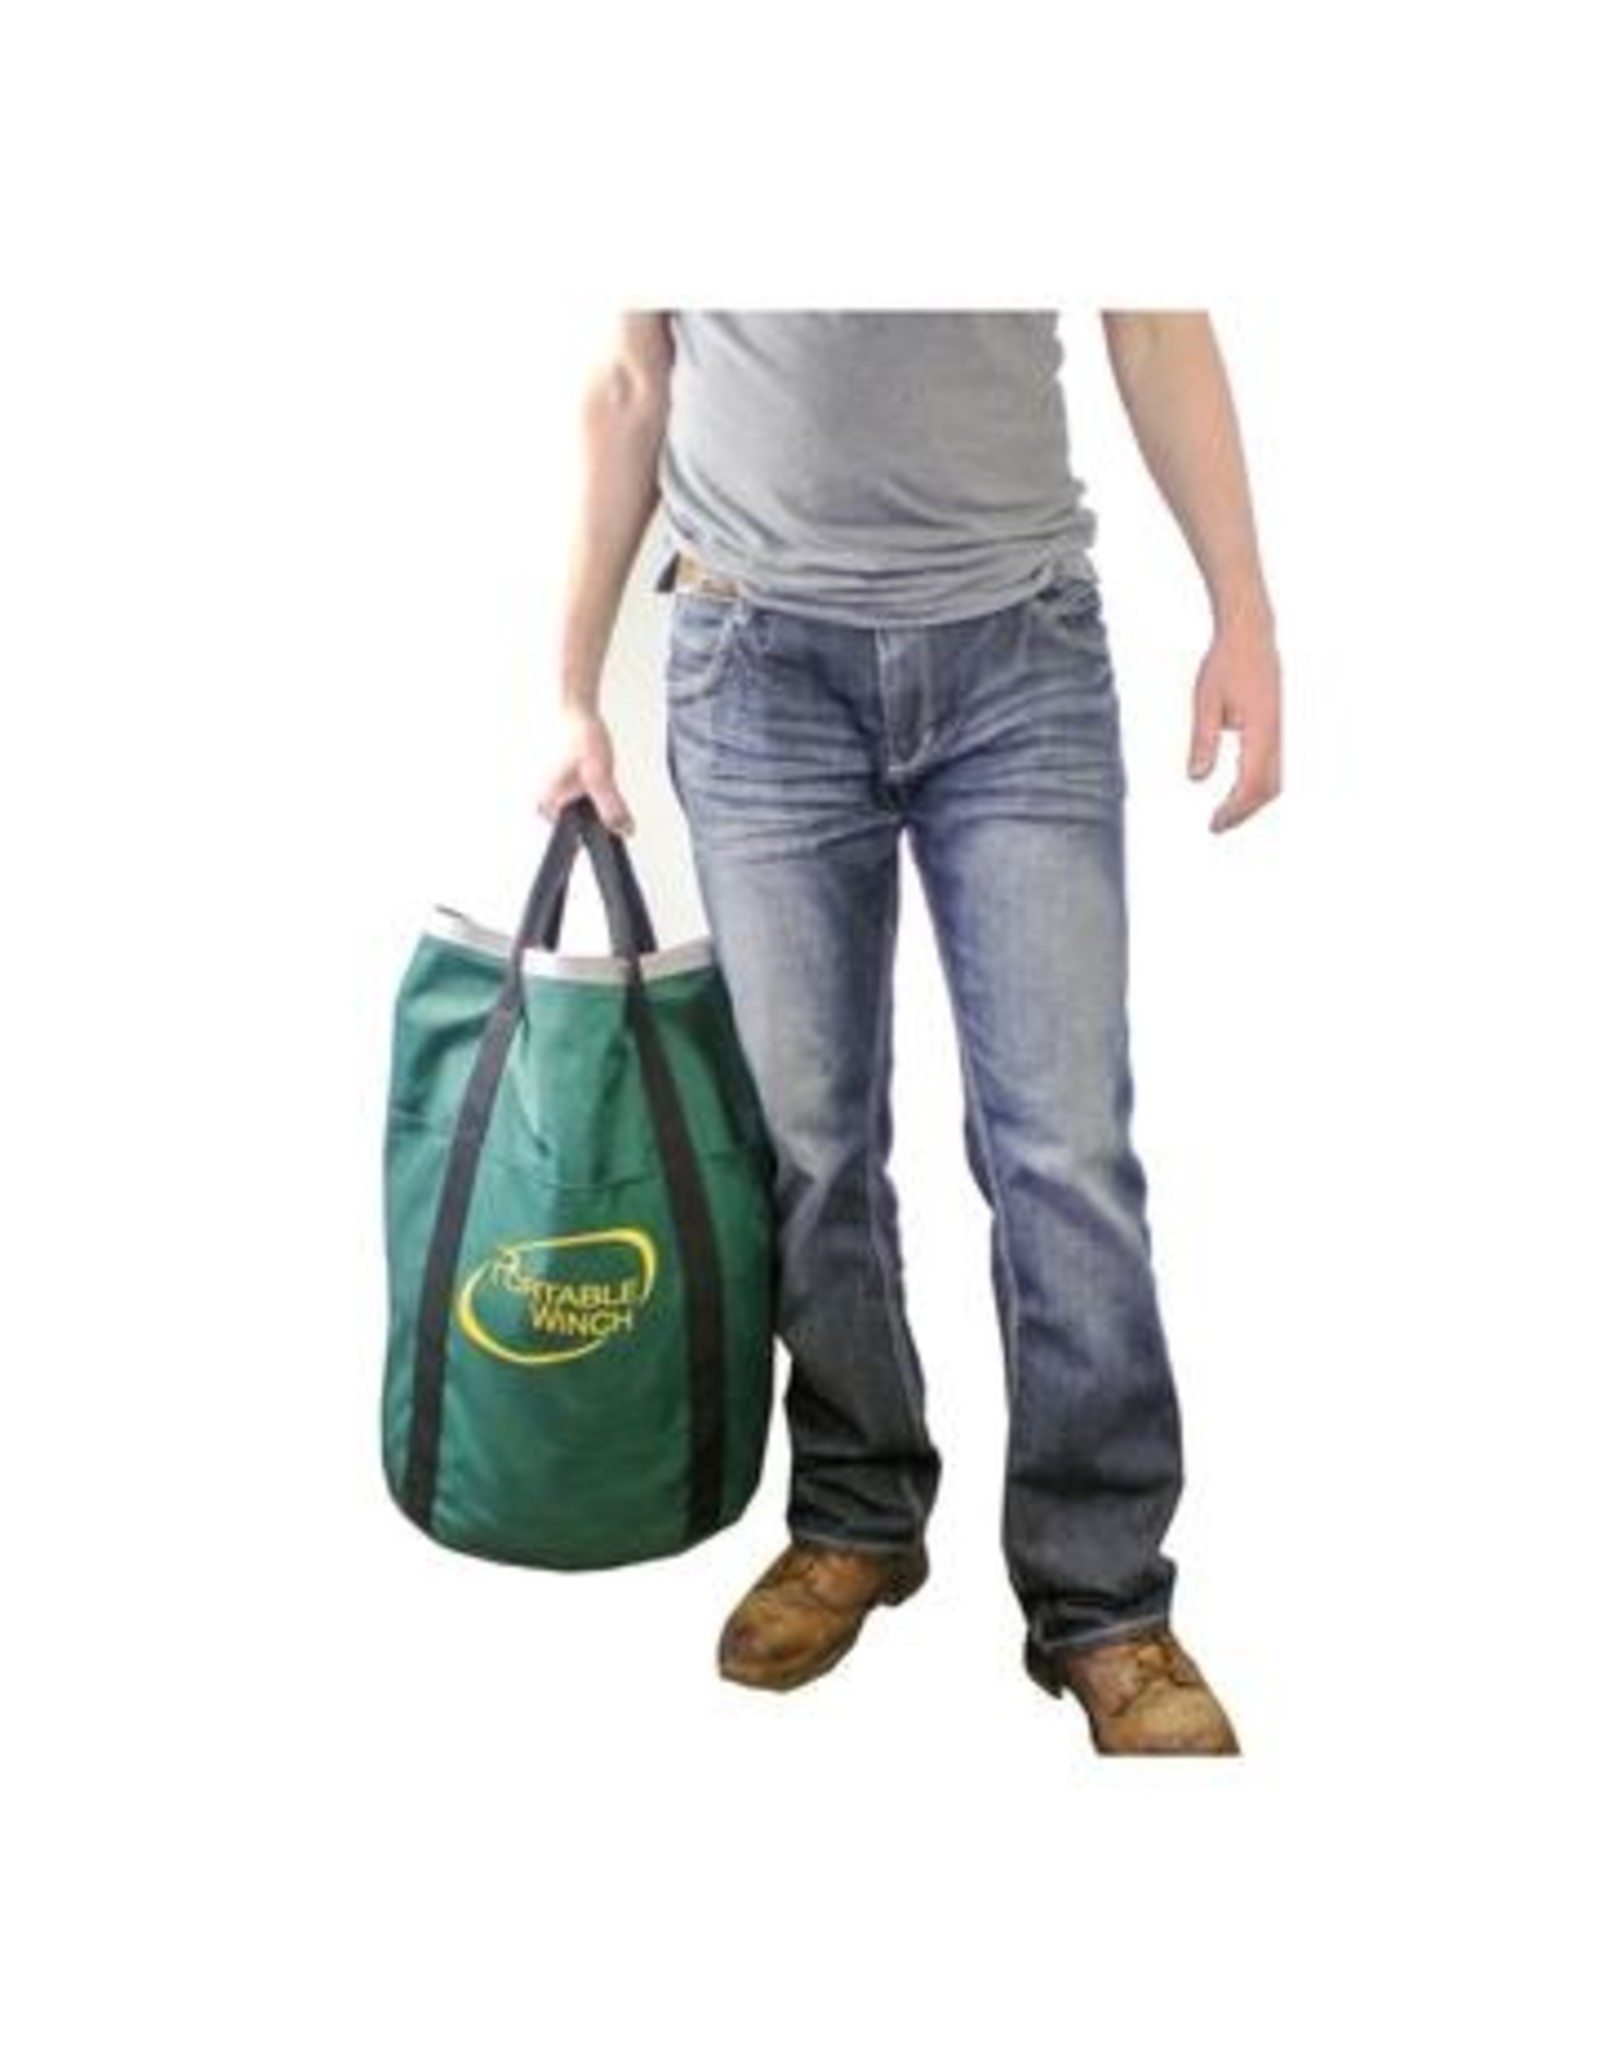 Portable Winch PW  ROPE BAG X-LARGE